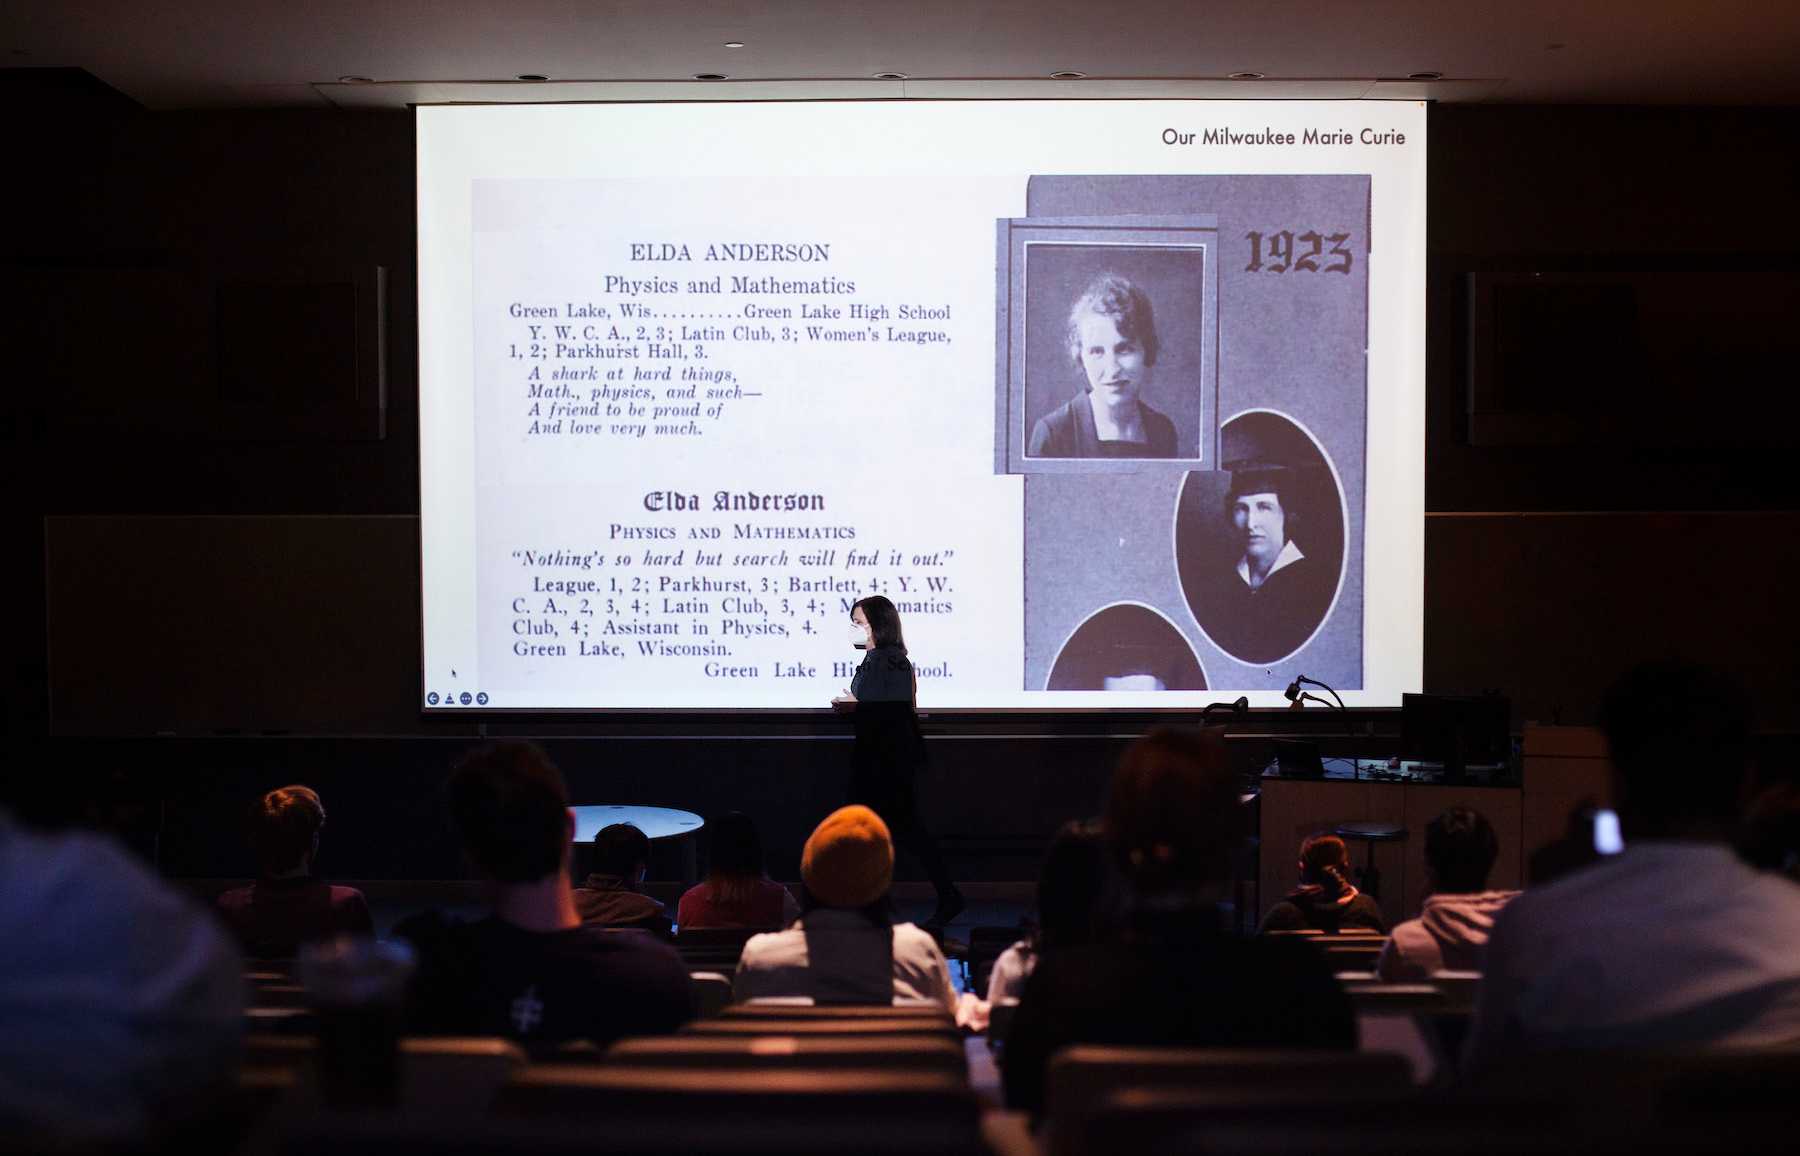 With a large screen behind her showing a Green Lake High School yearbook entry about Elda Anderson, Megan Pickett talks about Anderson's remarkable life during a presentation on campus in Winter Term.